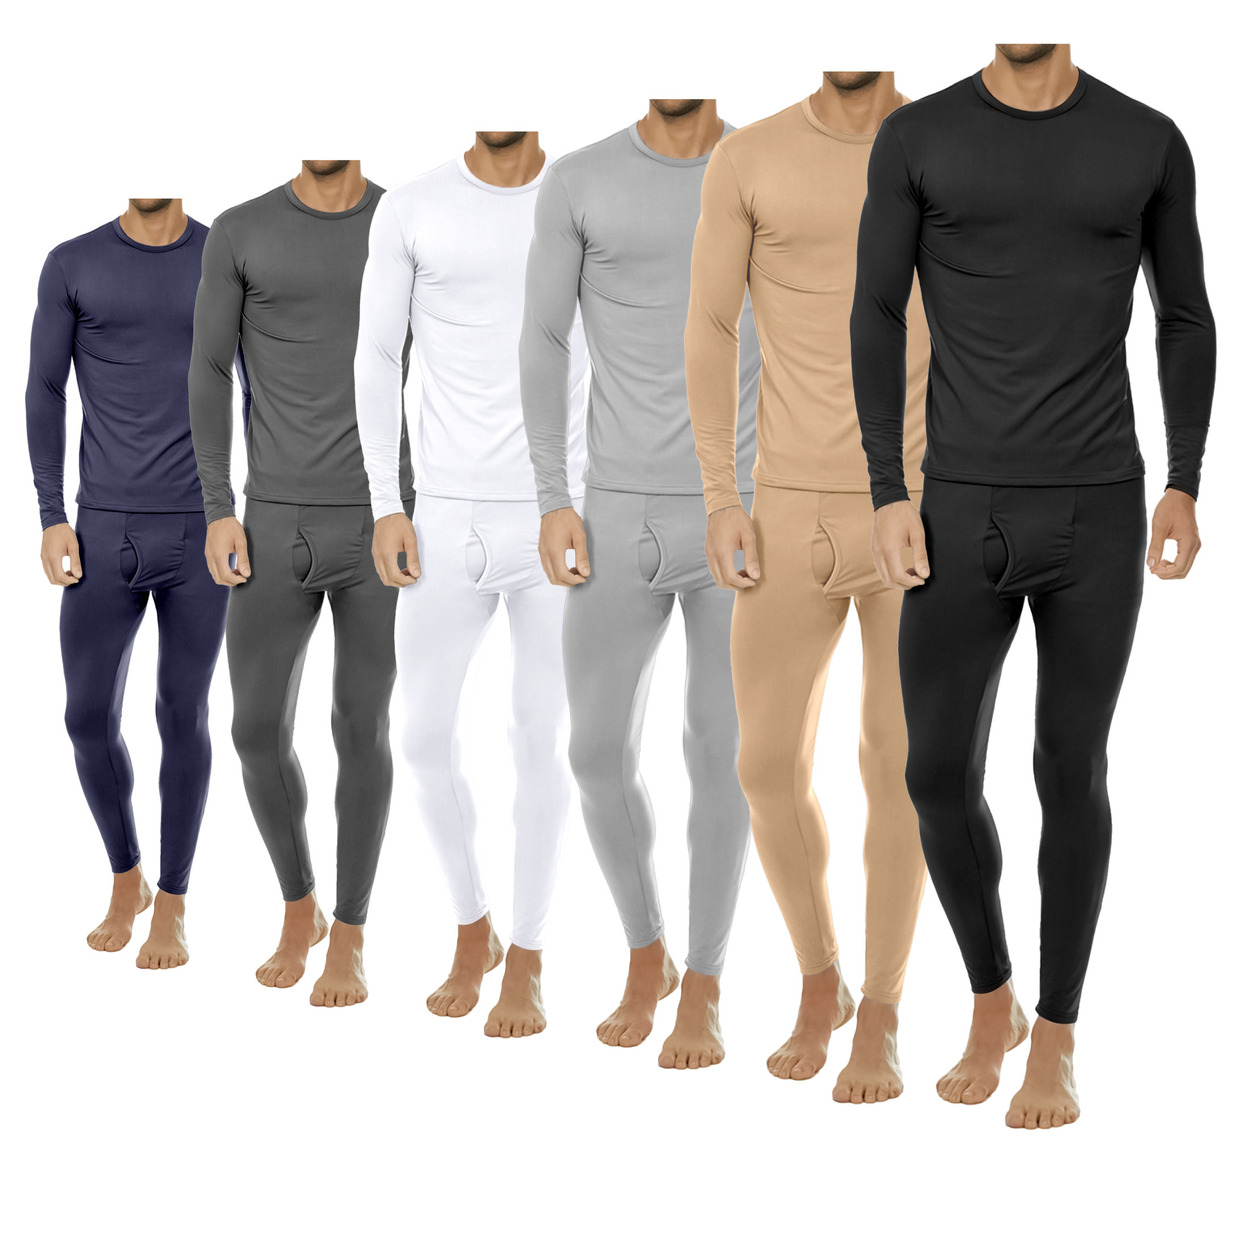 2-Sets: Men's Winter Warm Fleece Lined Thermal Underwear Set For Cold Weather - White&white, Xx-large